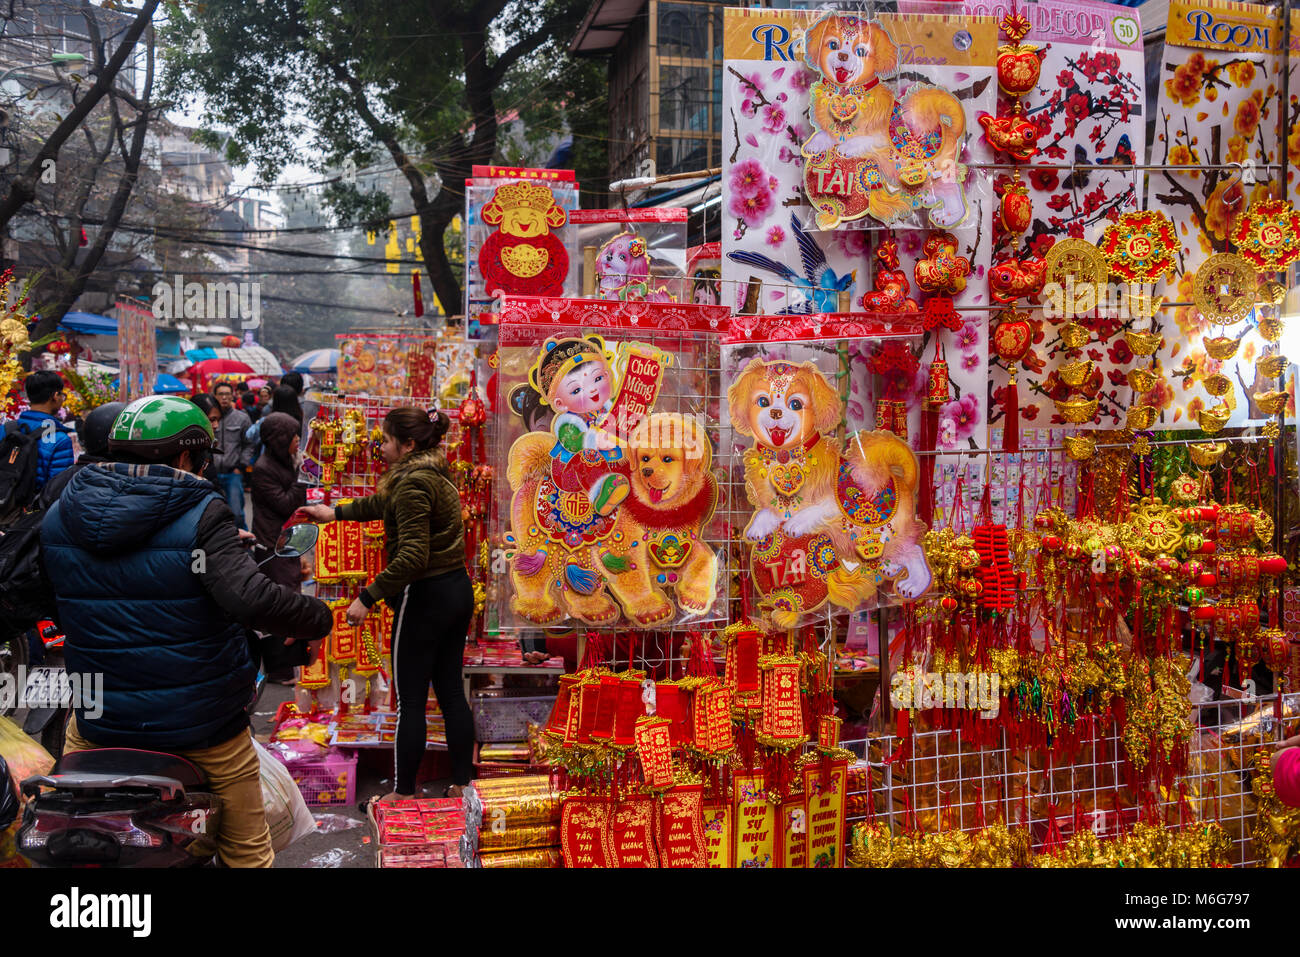 Goods to celebrate the Chinese new year on sale in 'Paper Street' in Hanoi, Vietnam Stock Photo